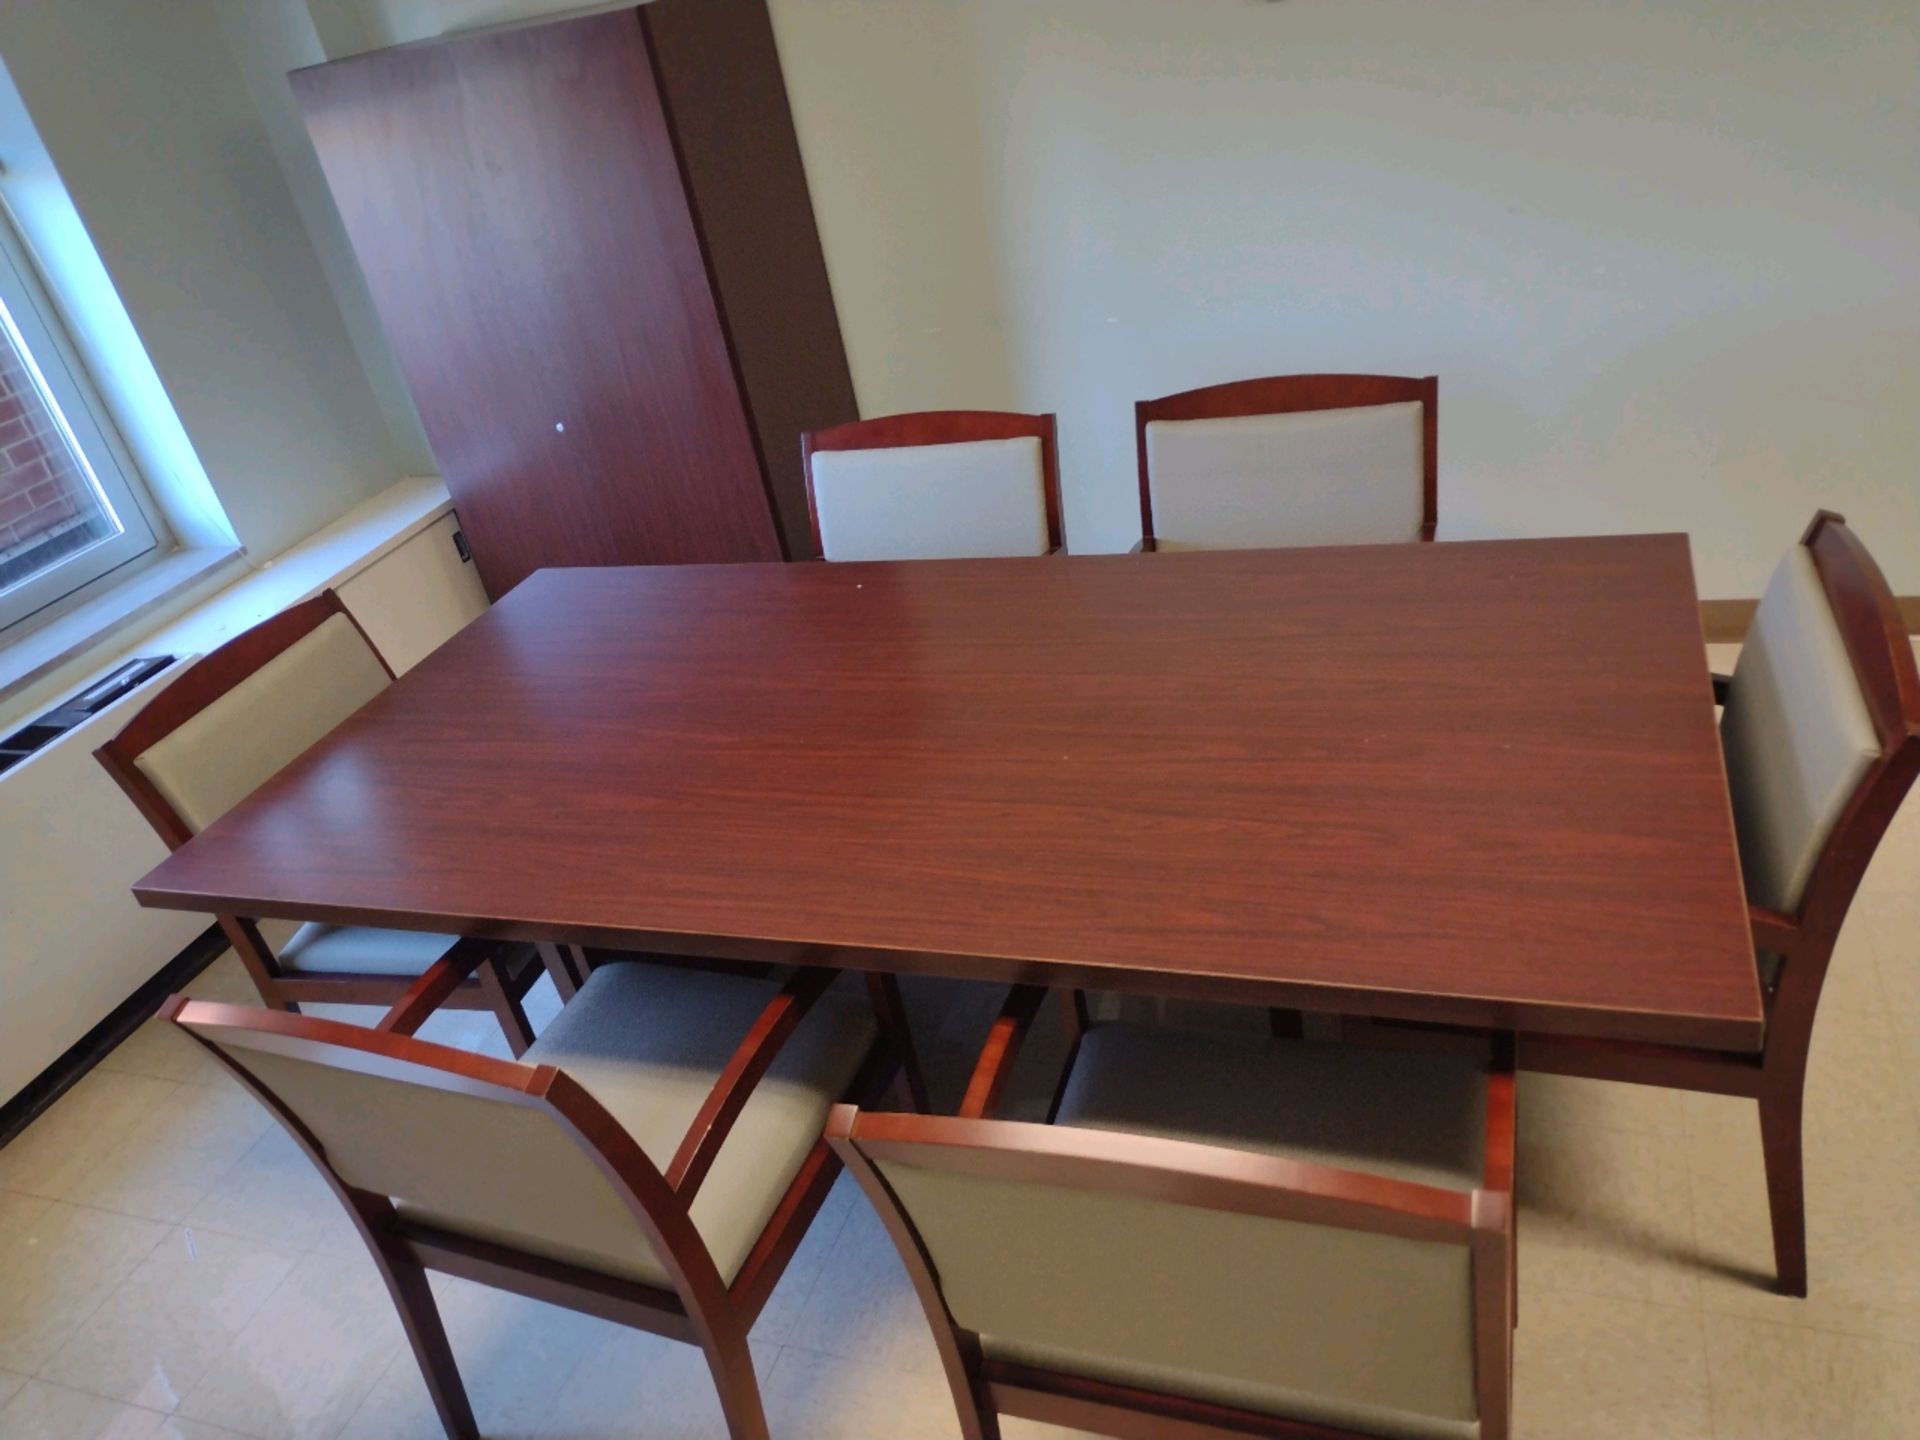 OFFICE TO INCLUDE: TABLE, CHAIRS, DESK, OFFICE TASK CHAIR, BULLETIN BOARD/ORGANIZER RACK, FILE